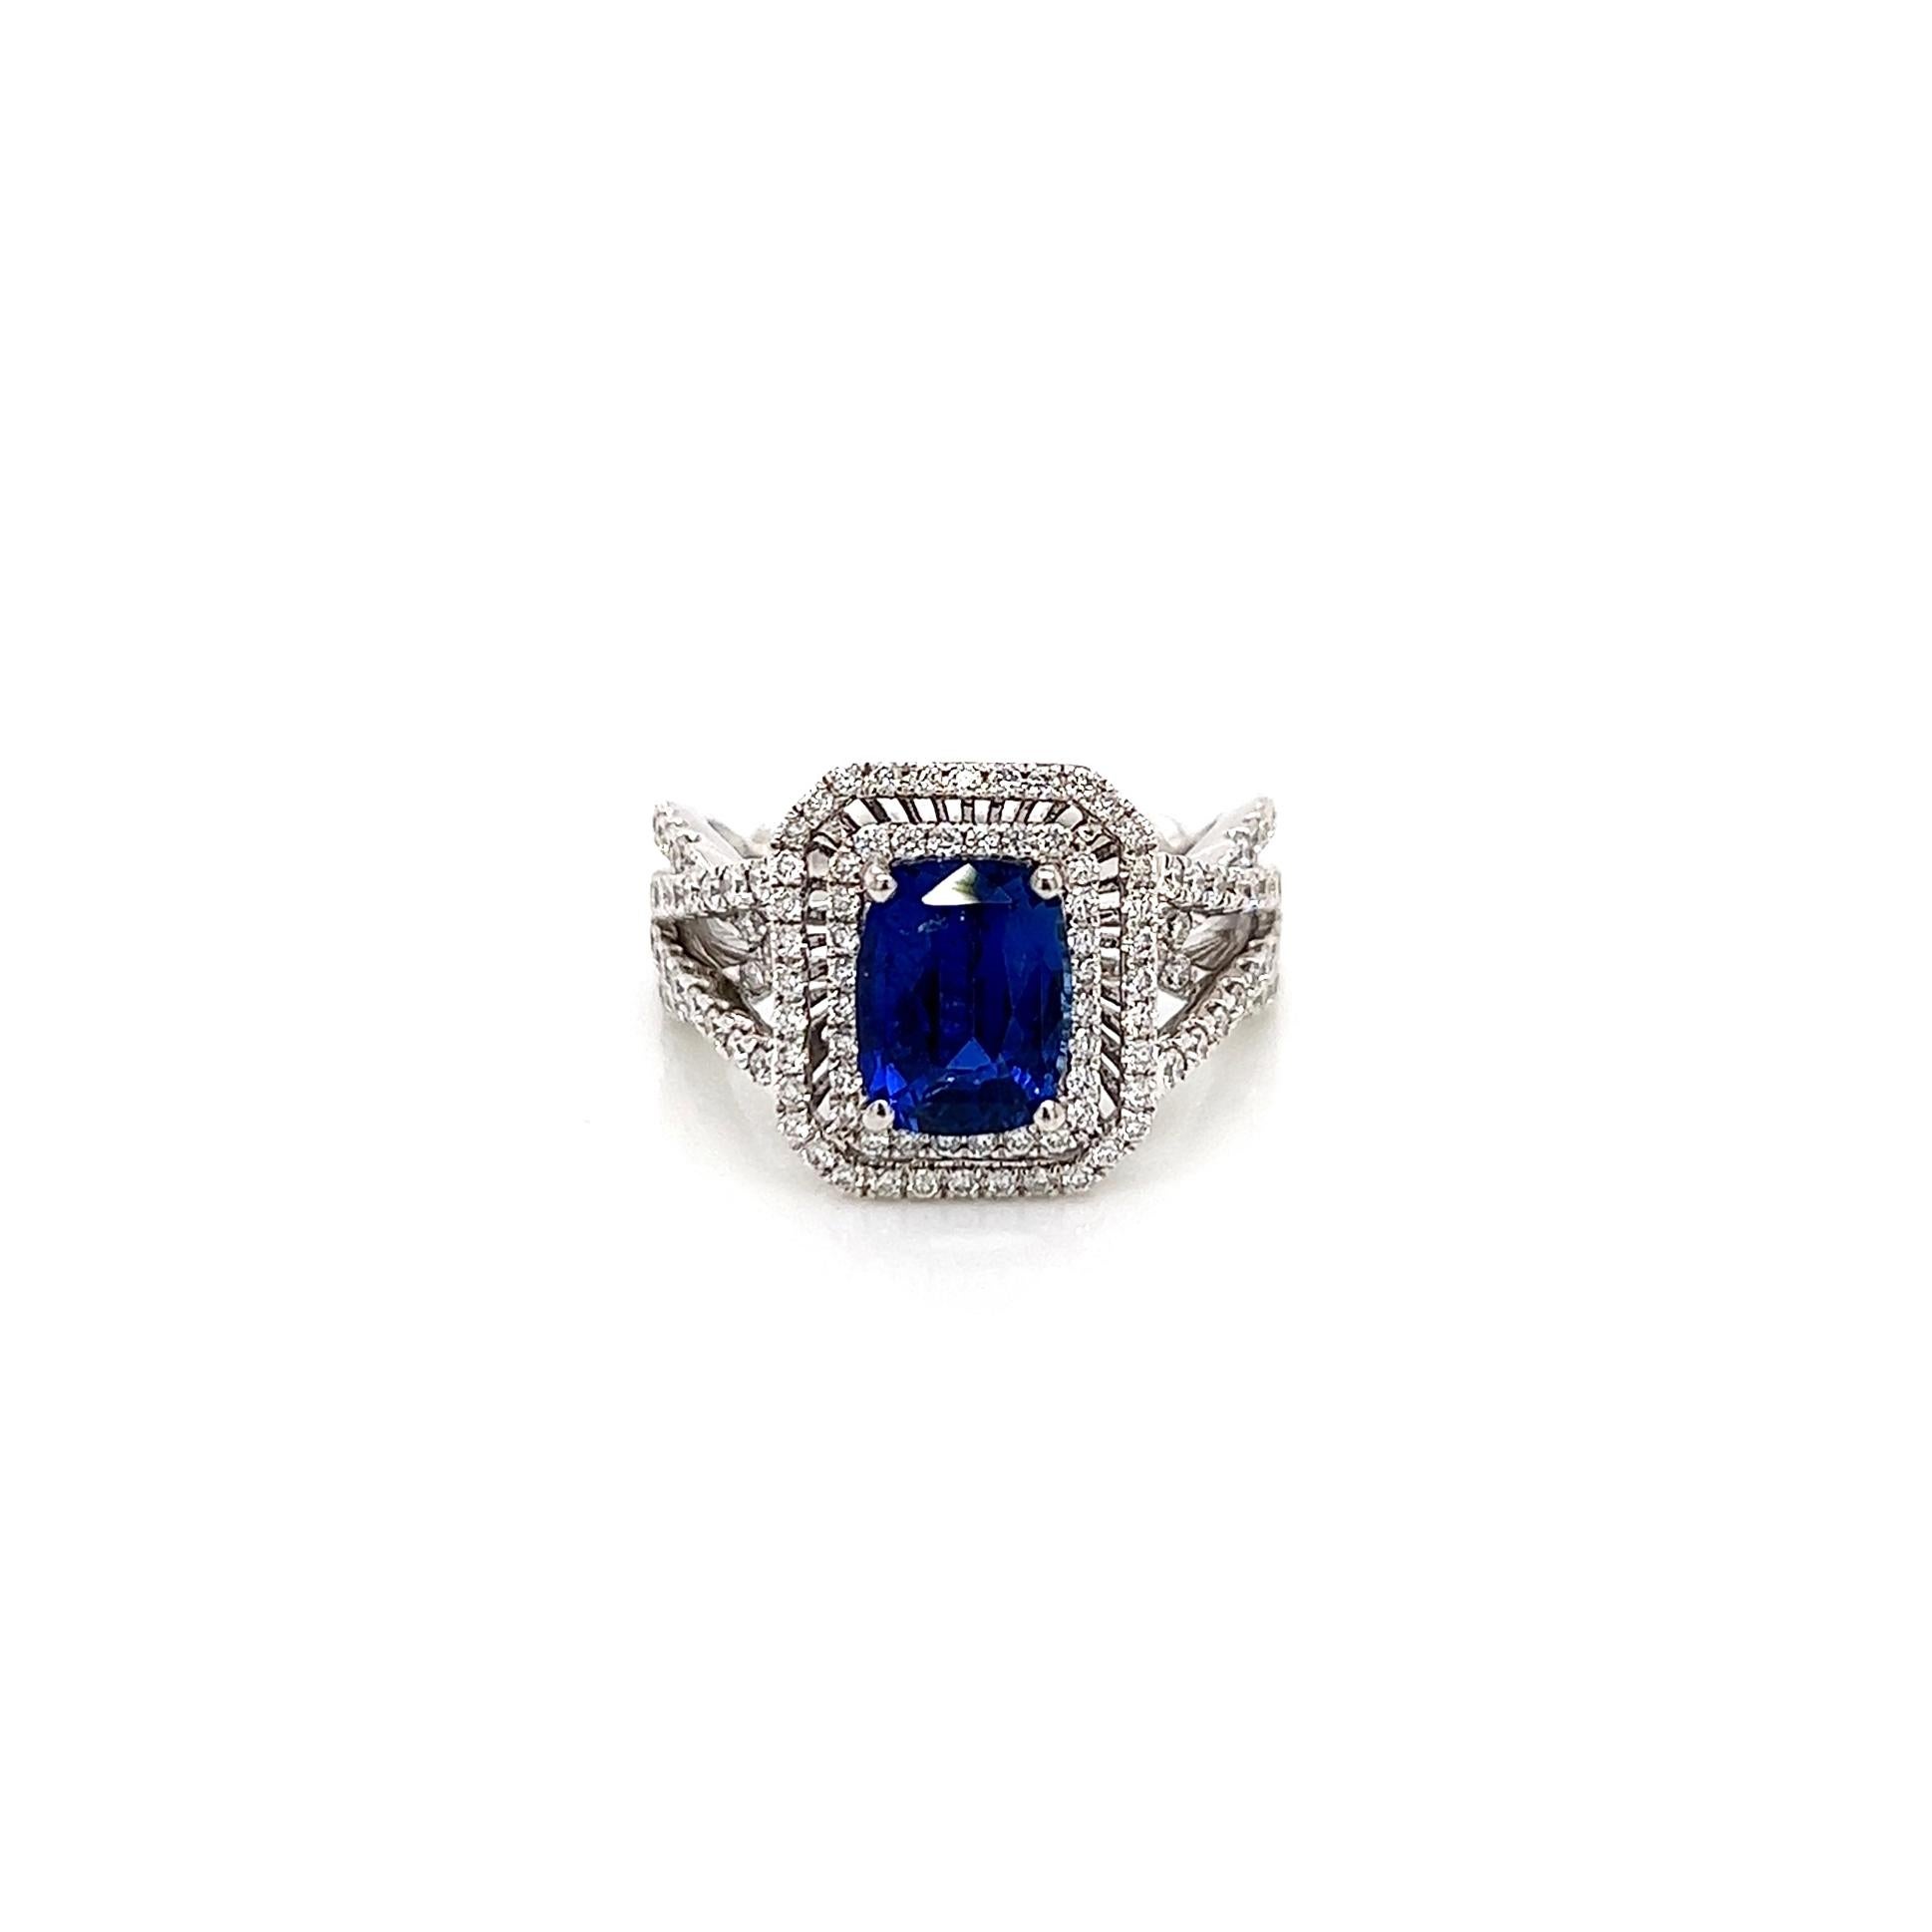 3.11 Total Carat Sapphire Diamond Engagement Ring

-Metal Type: 18K White Gold
-2.14 Carat Cushion Cut Blue Sapphire
-0.97 Carat Round Side Diamonds, F-G color, VS-SI clarity
-Size 6.25

Made in New York City.